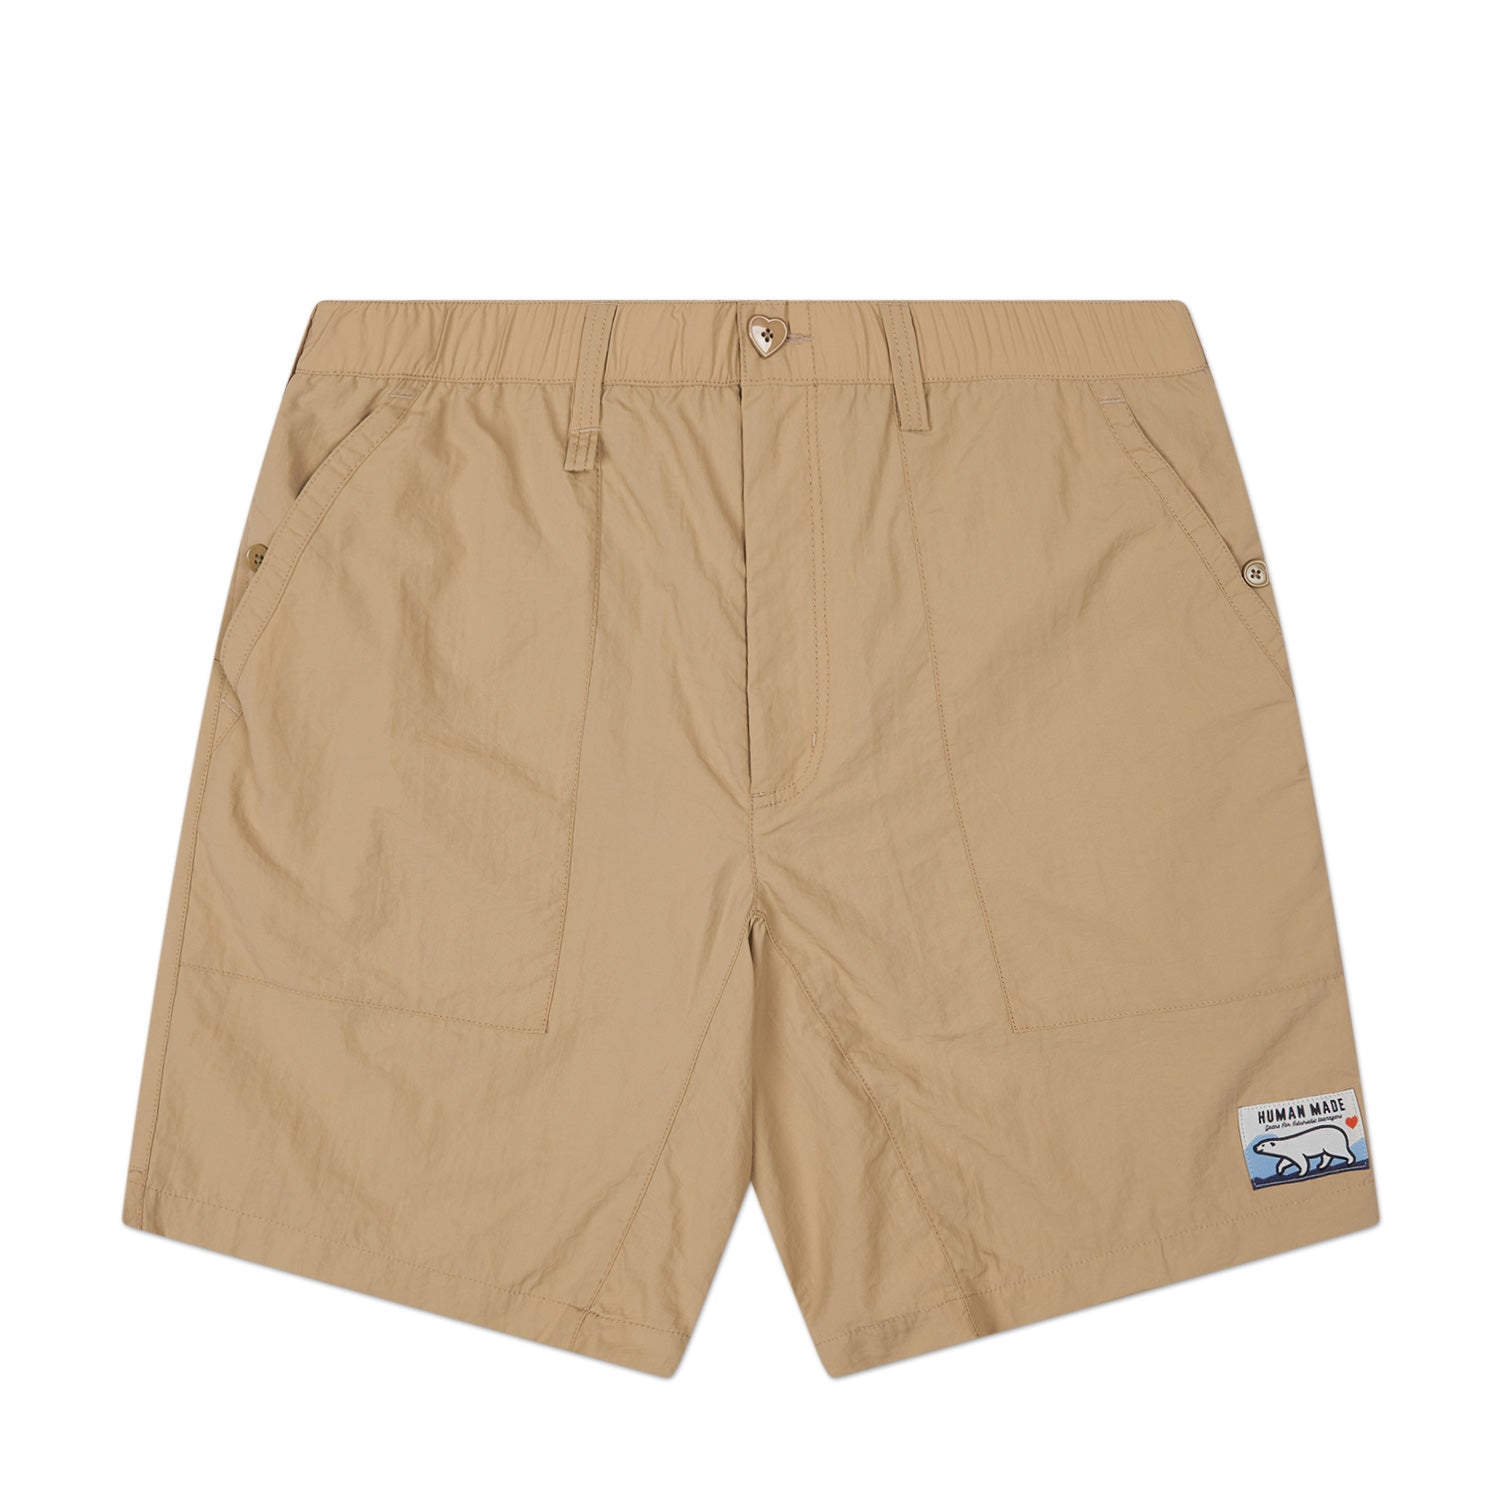 human made camping shorts (beige) HM25PT017 - a.plus store